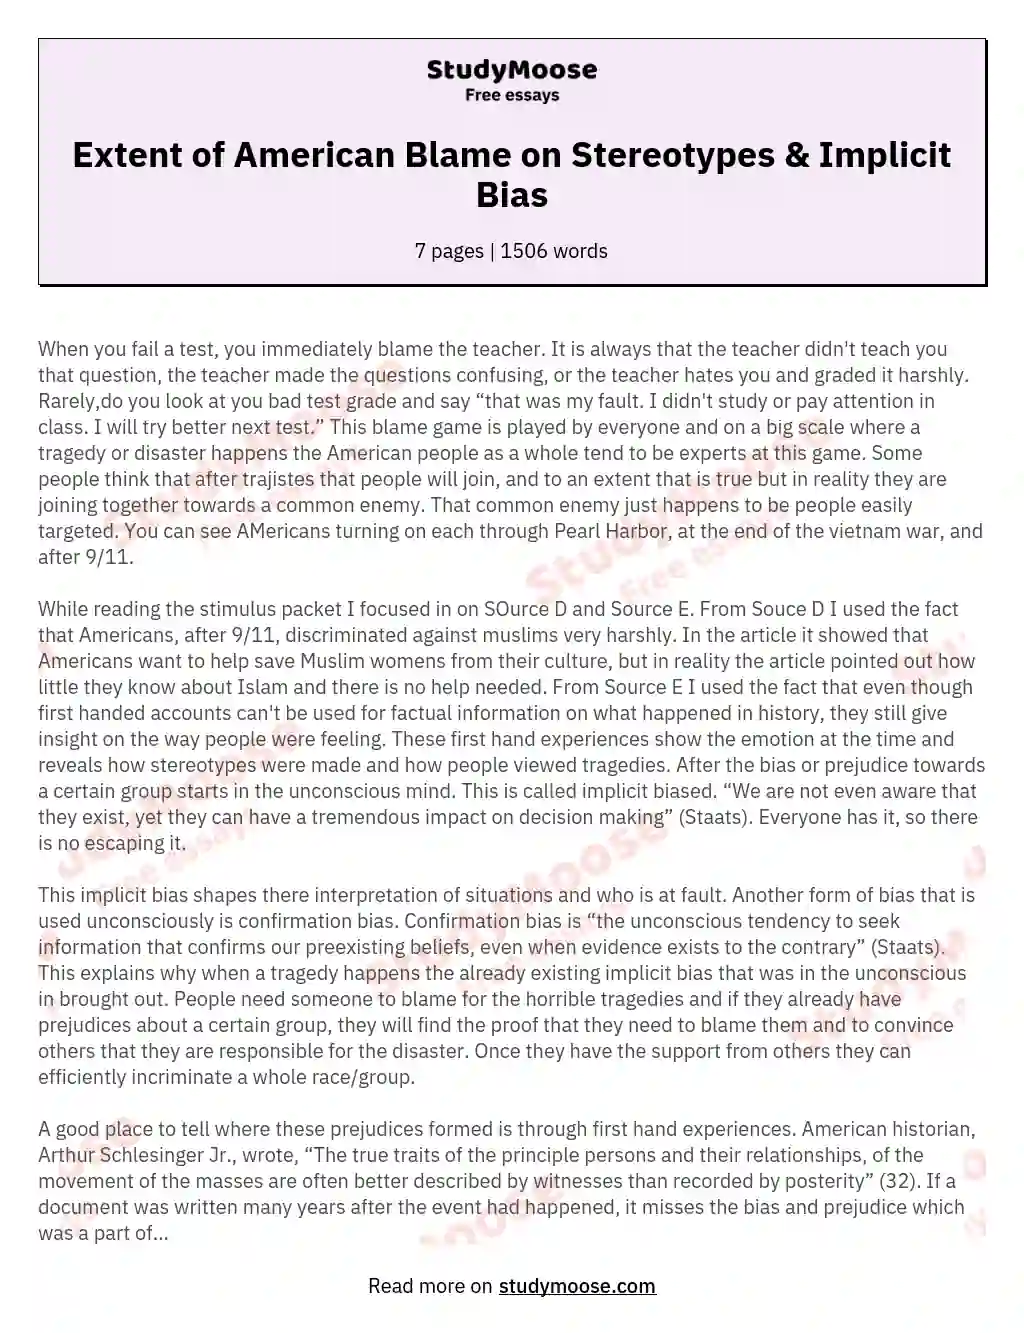 Extent of American Blame on Stereotypes & Implicit Bias essay